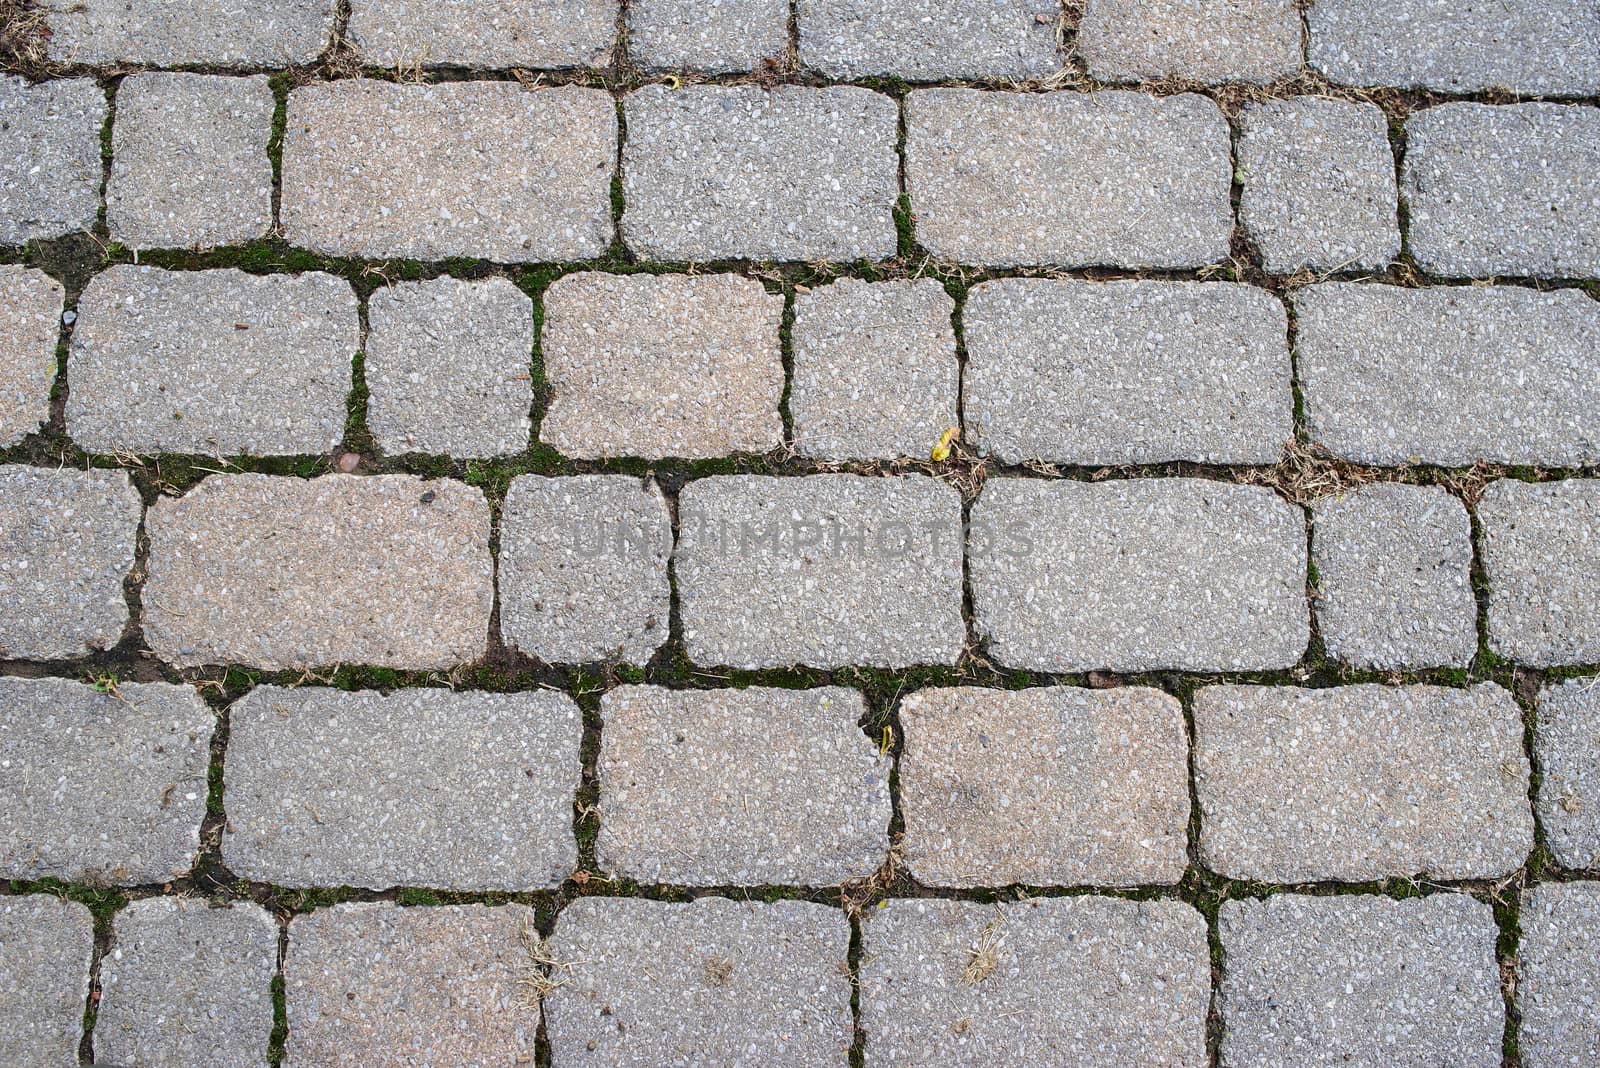 Beautiful full frame background image of old weathered paving stones / cobblestones. Subtle colors and textures.